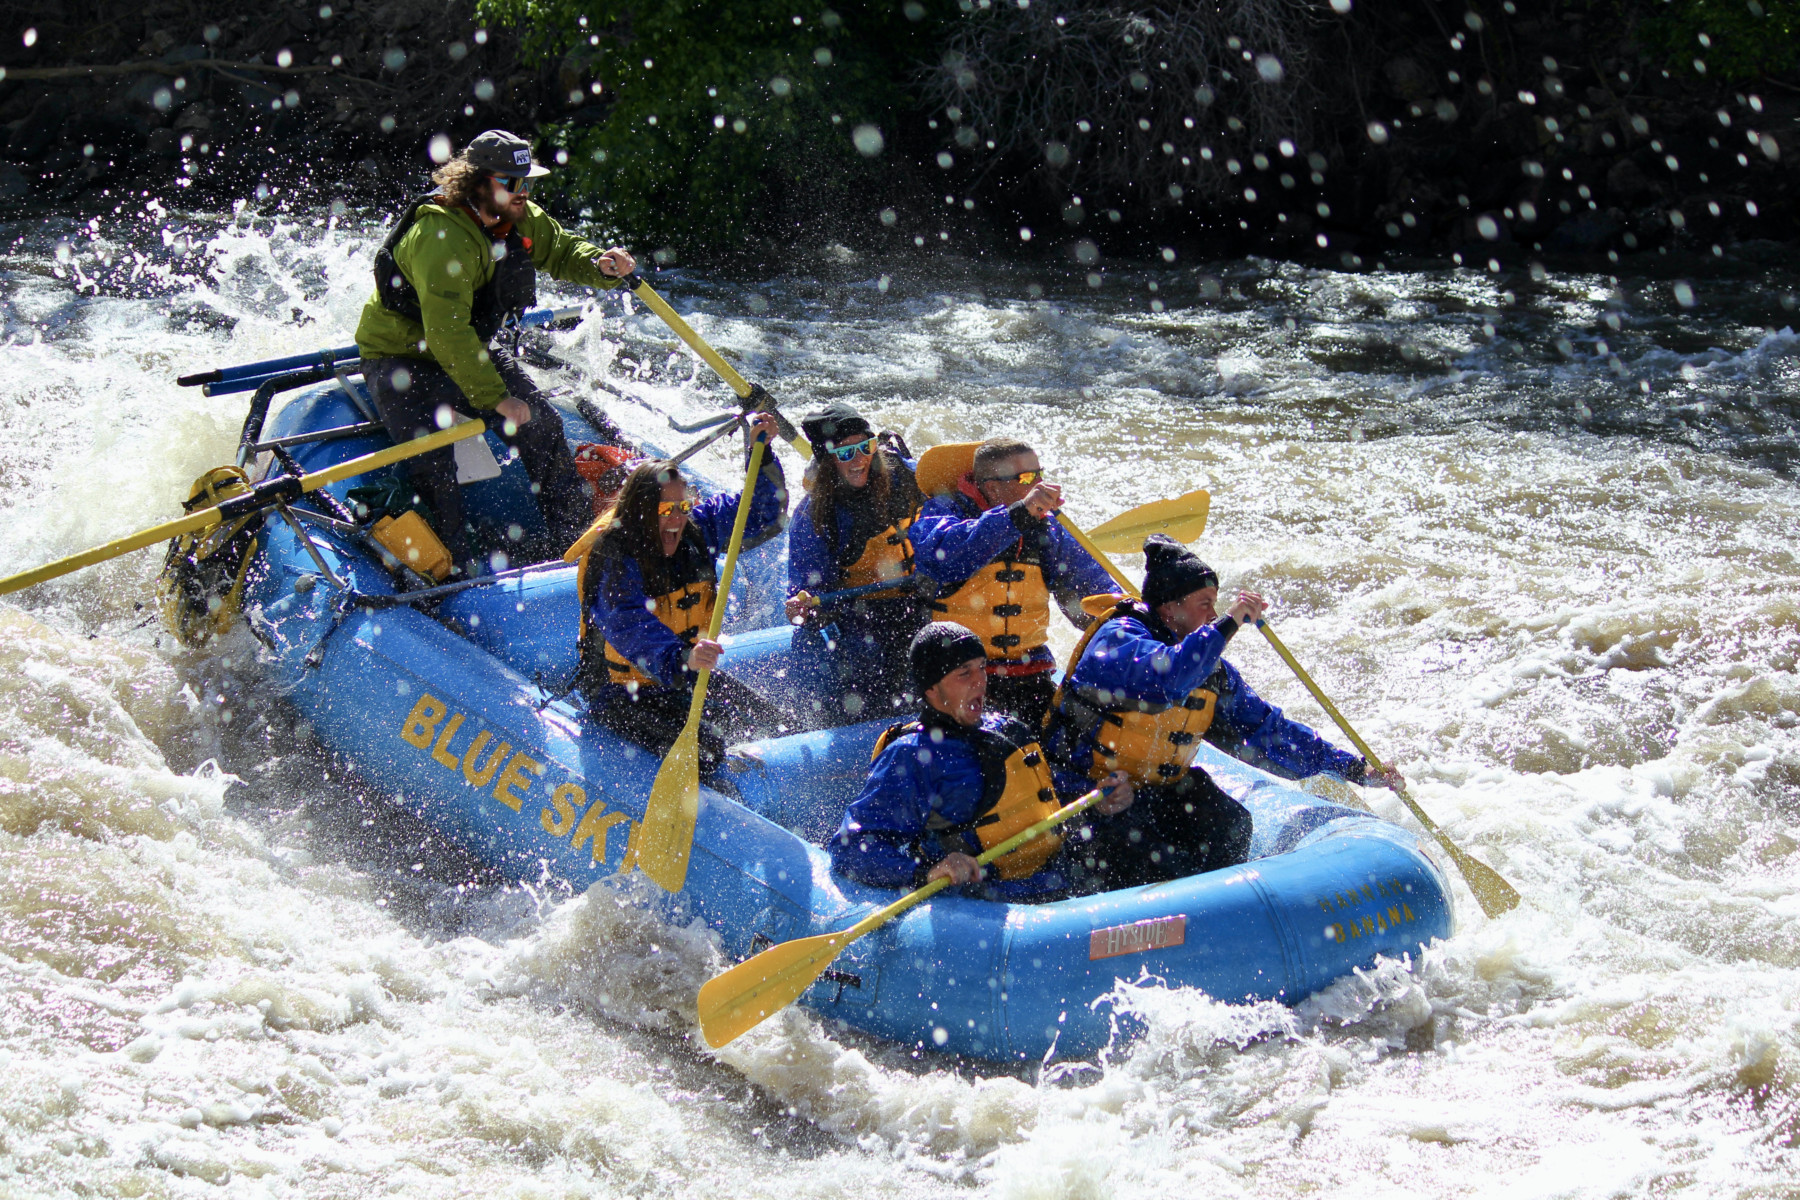 A photo of a raft going through rapids on a Half Day Rafting Adventure. The boat is full of people and they all look excited.